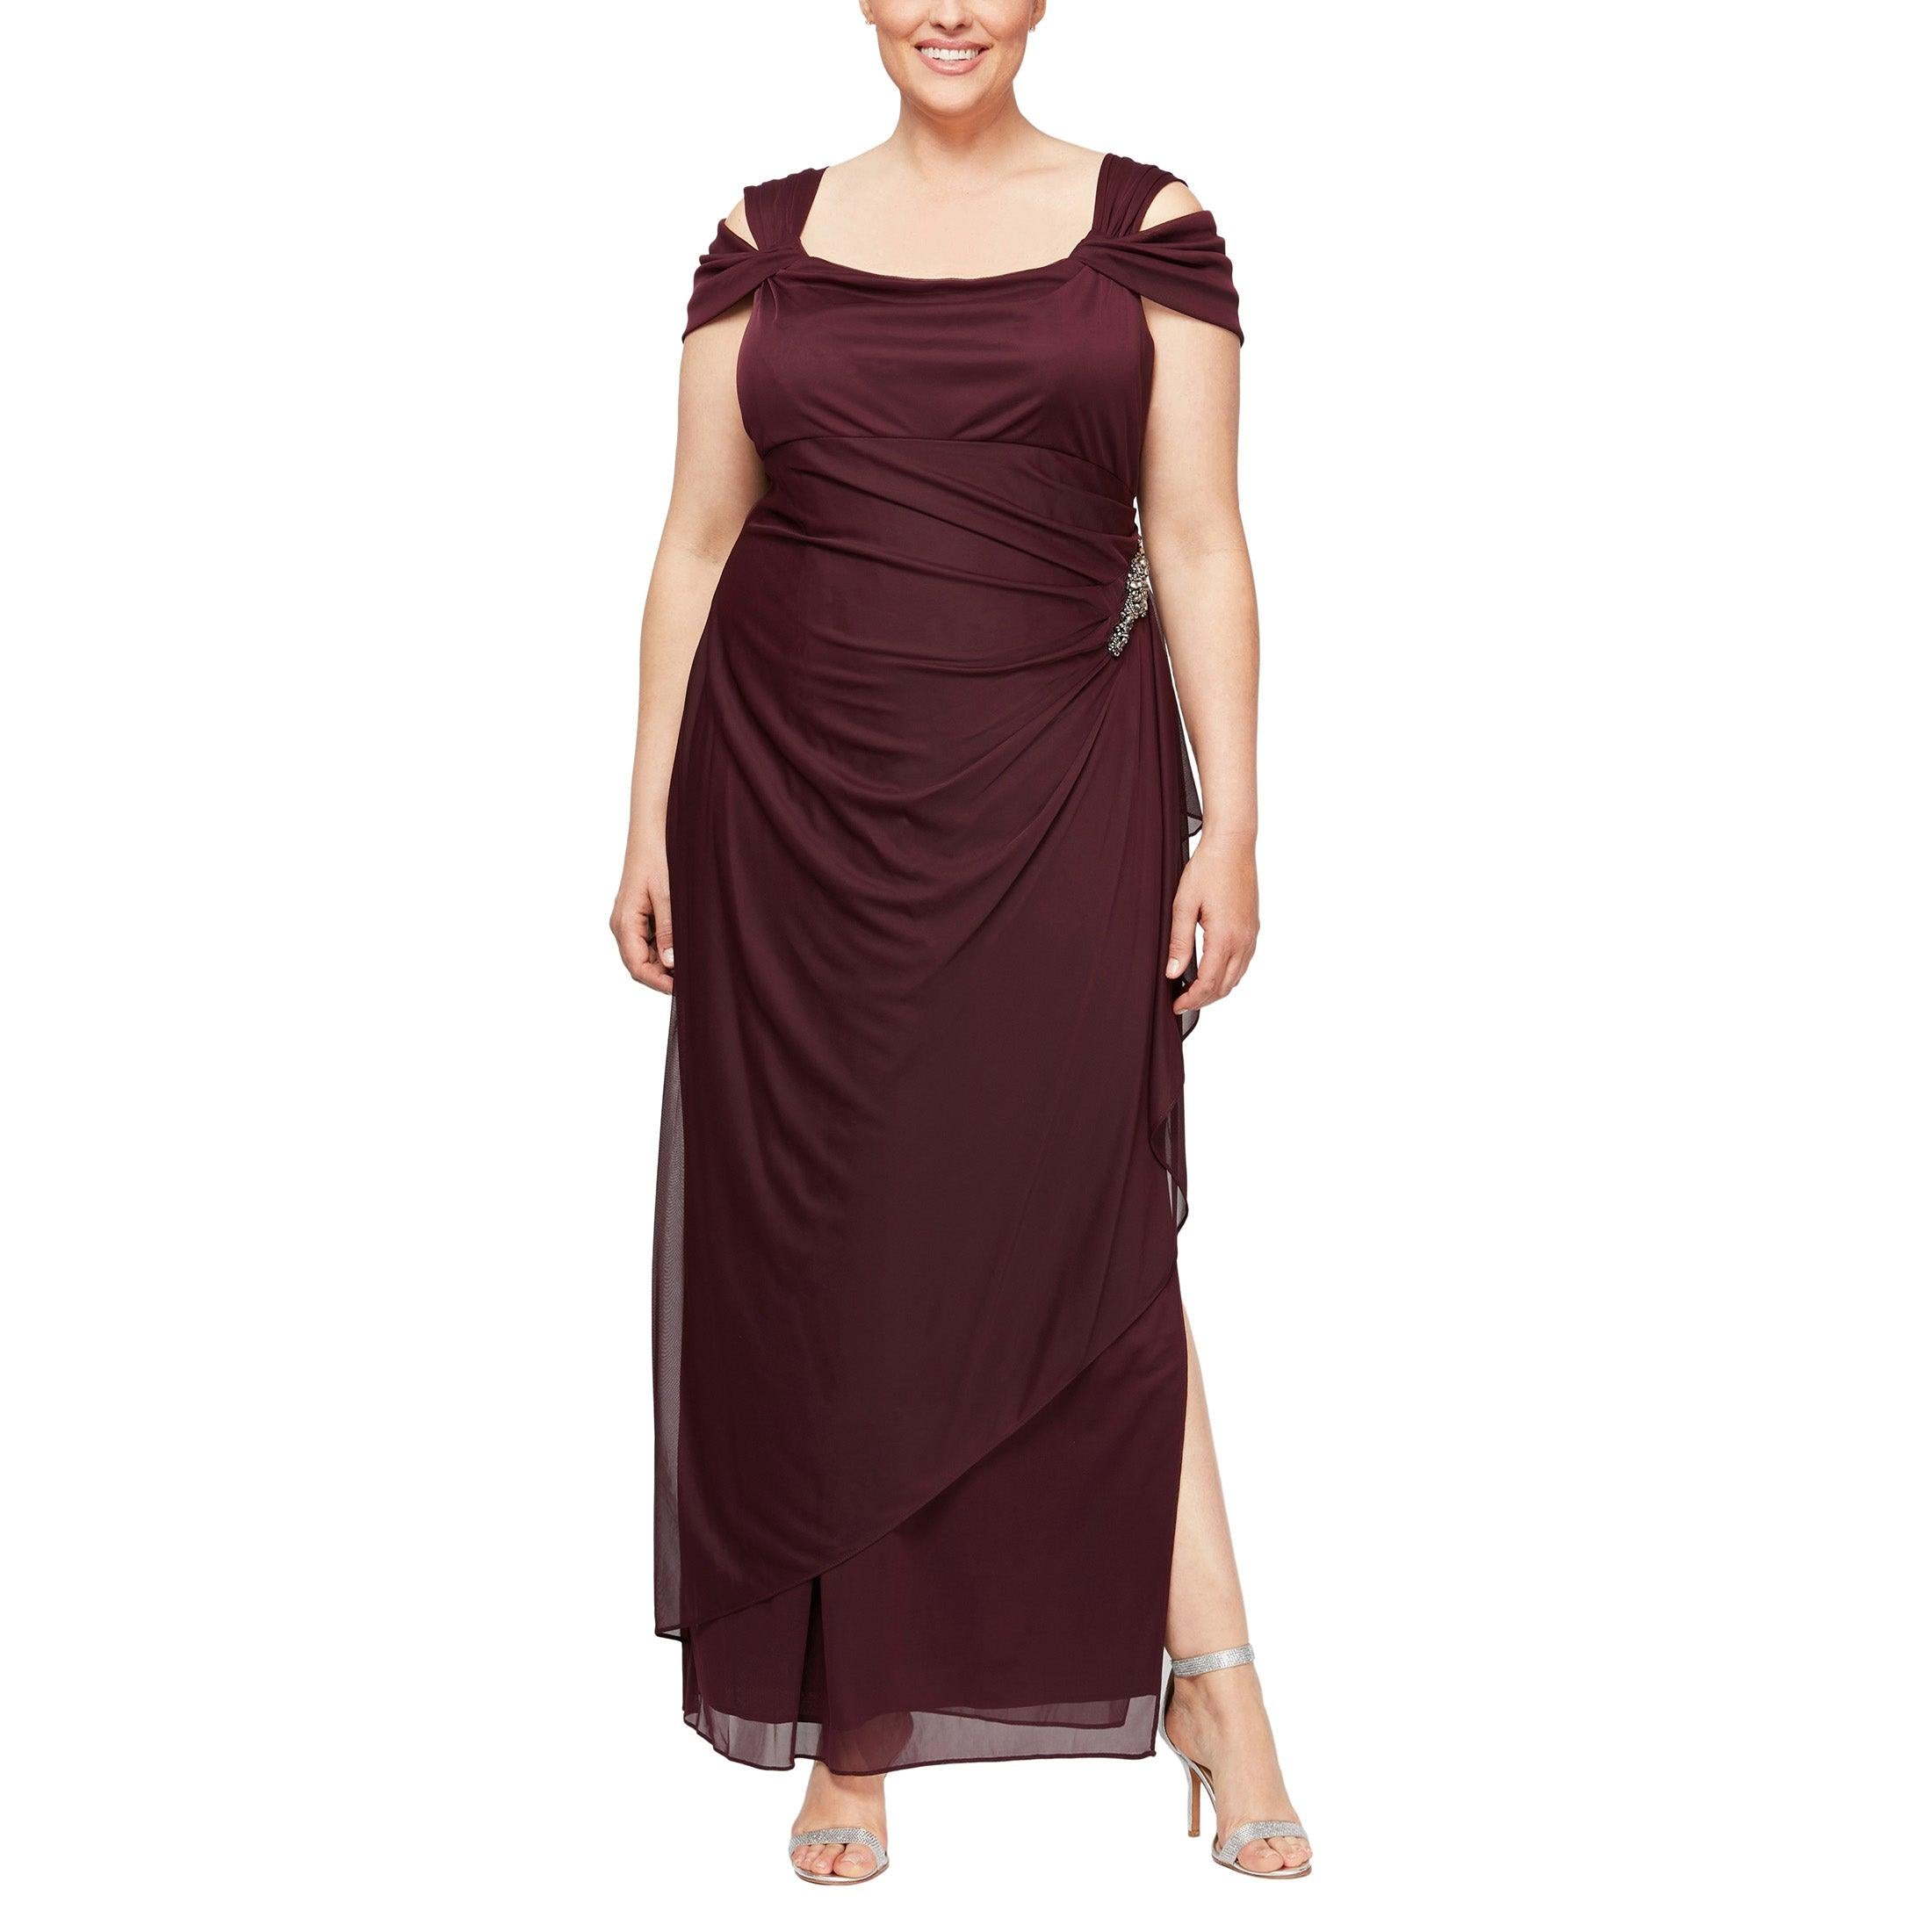 Alex Evenings AE4121198 Plus Size Long Formal Dress for $29.99 – The Dress  Outlet